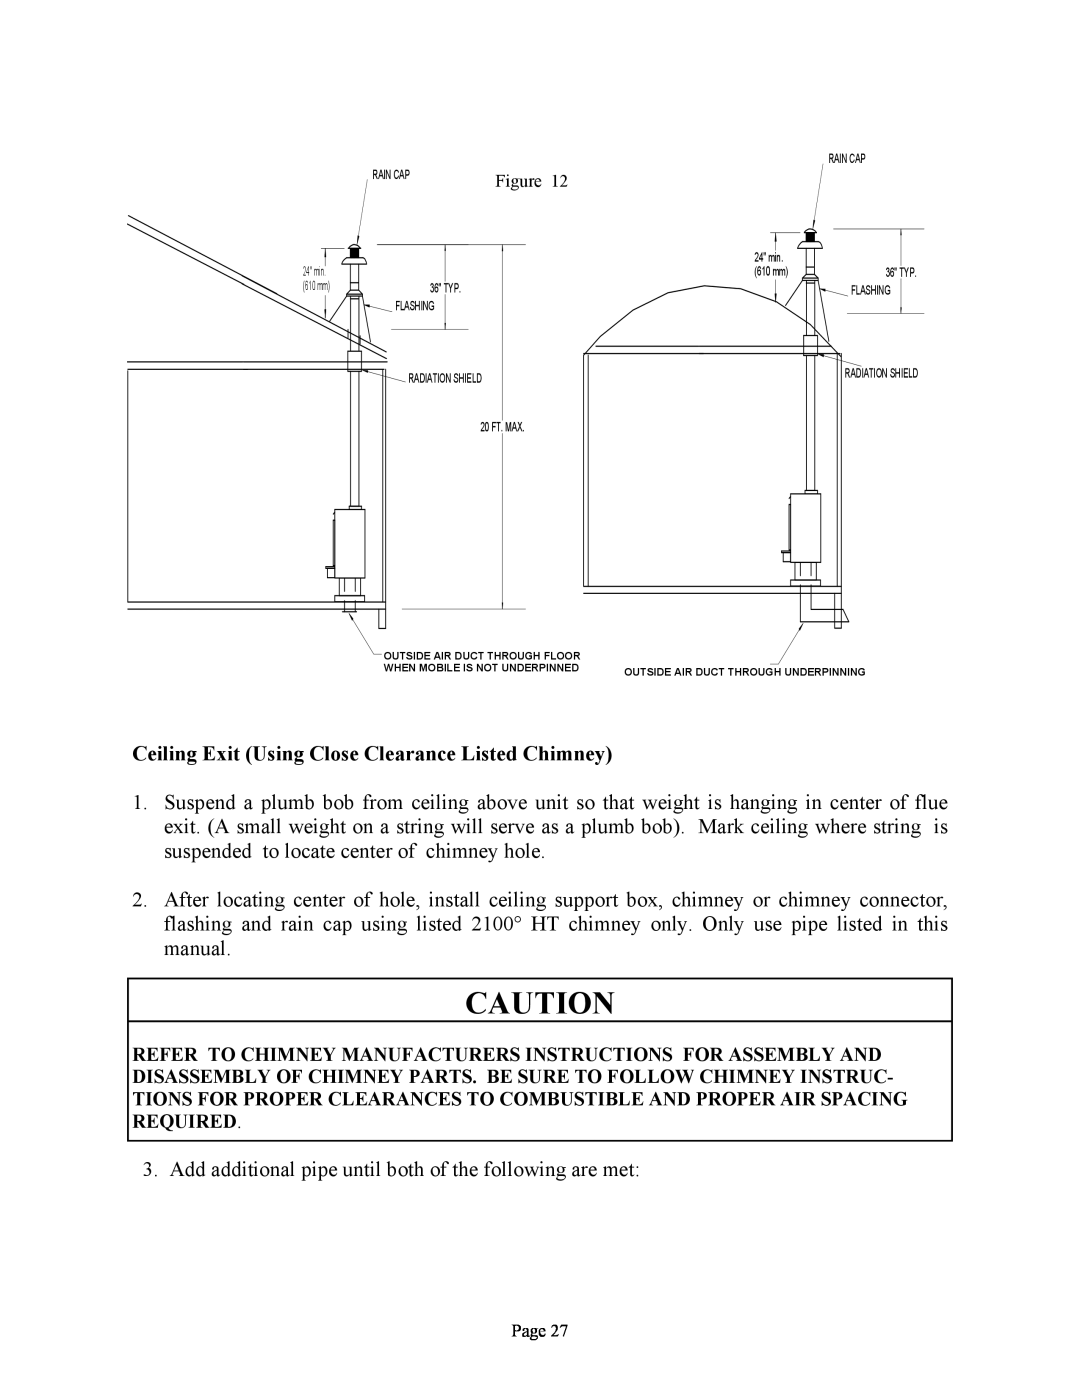 New Buck Corporation 81 installation instructions Ceiling Exit Using Close Clearance Listed Chimney, Page 